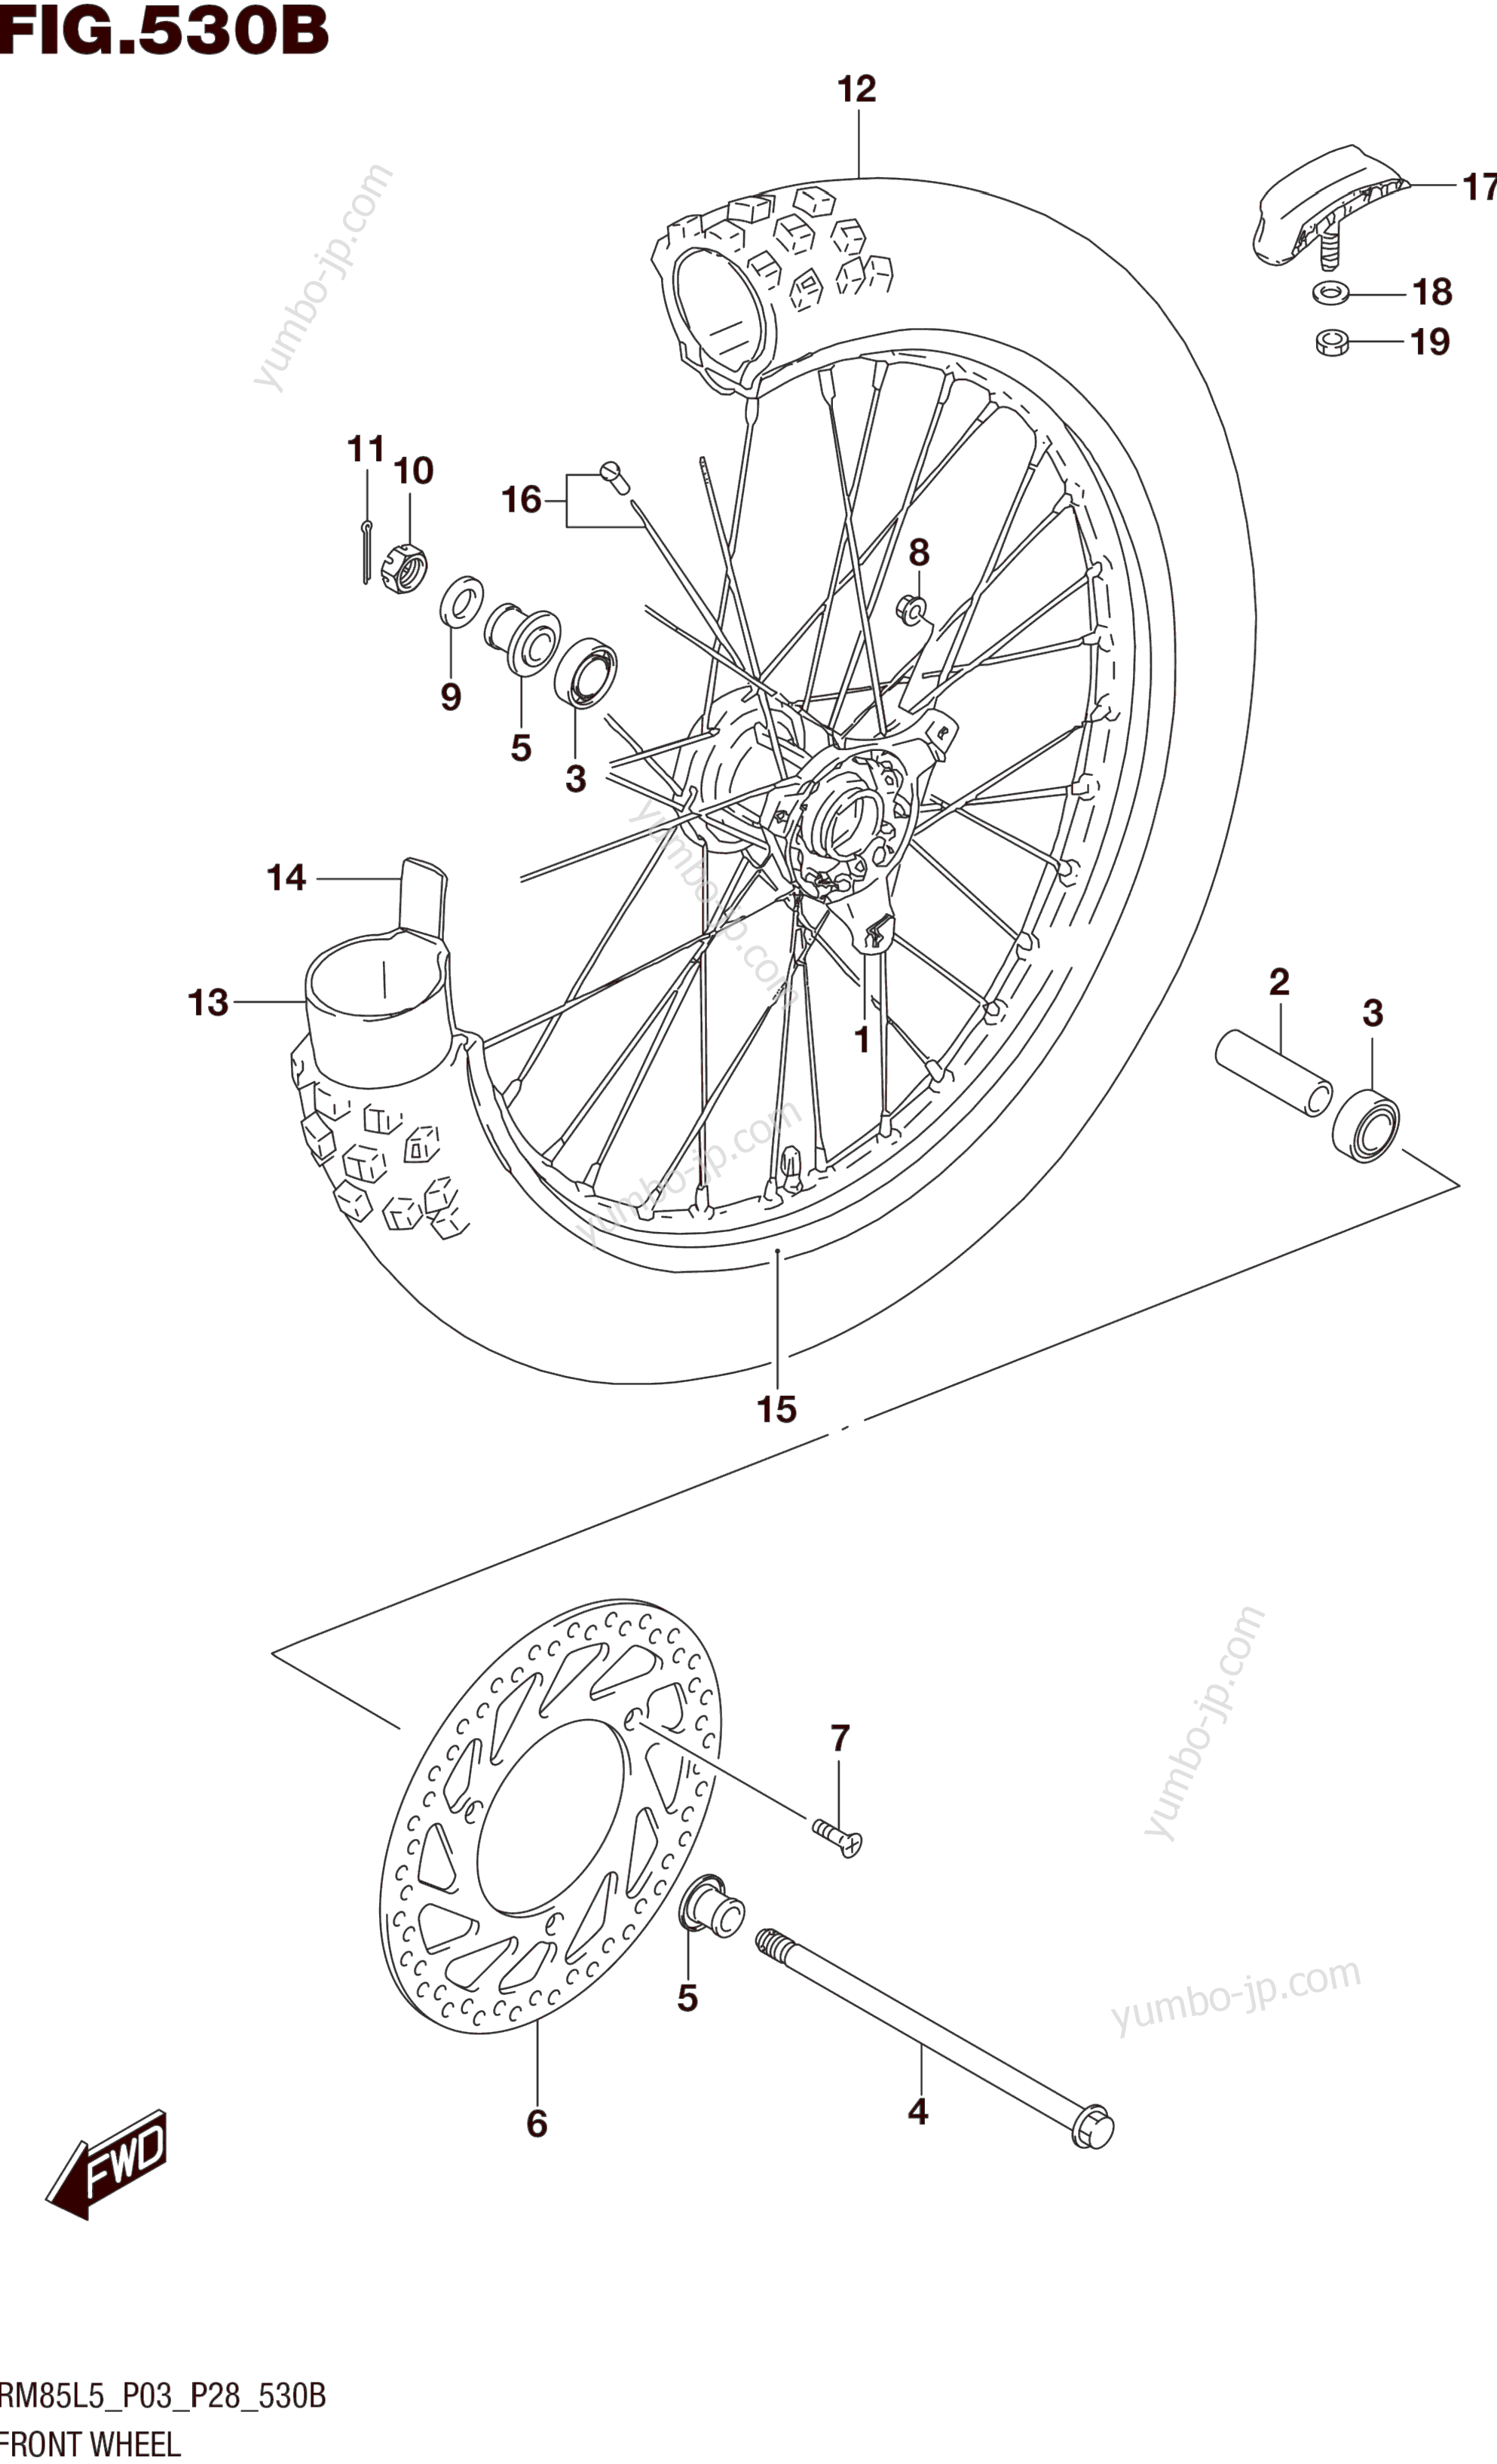 FRONT WHEEL (RM85L5 P28) for motorcycles SUZUKI RM85 2015 year